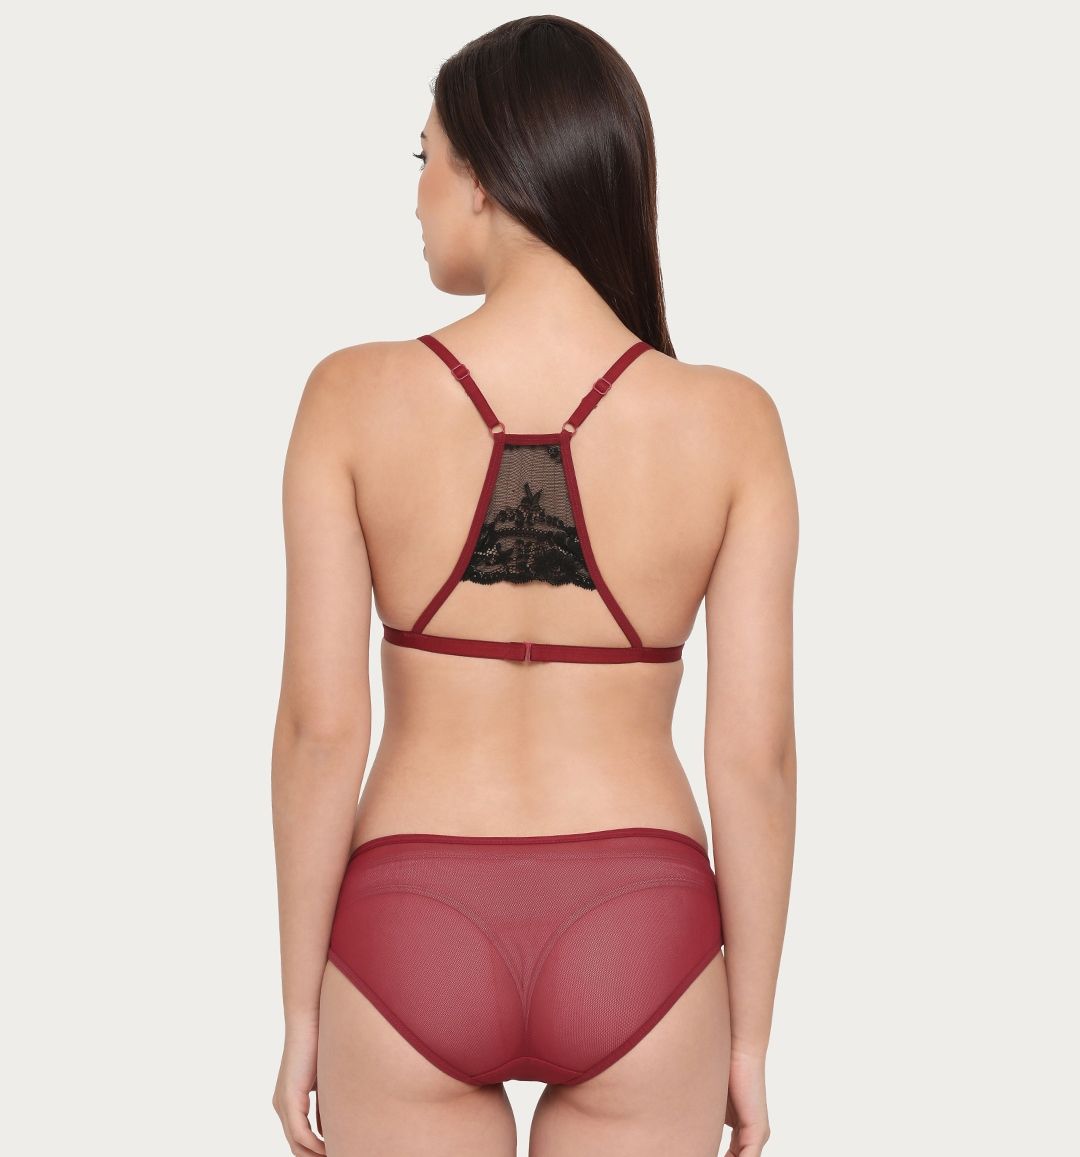 Buy Padded Non-Wired Demi Cup Plunge Bralette & Bikini Panty Set in Red -  Lace Online India, Best Prices, COD - Clovia - BP2164P04